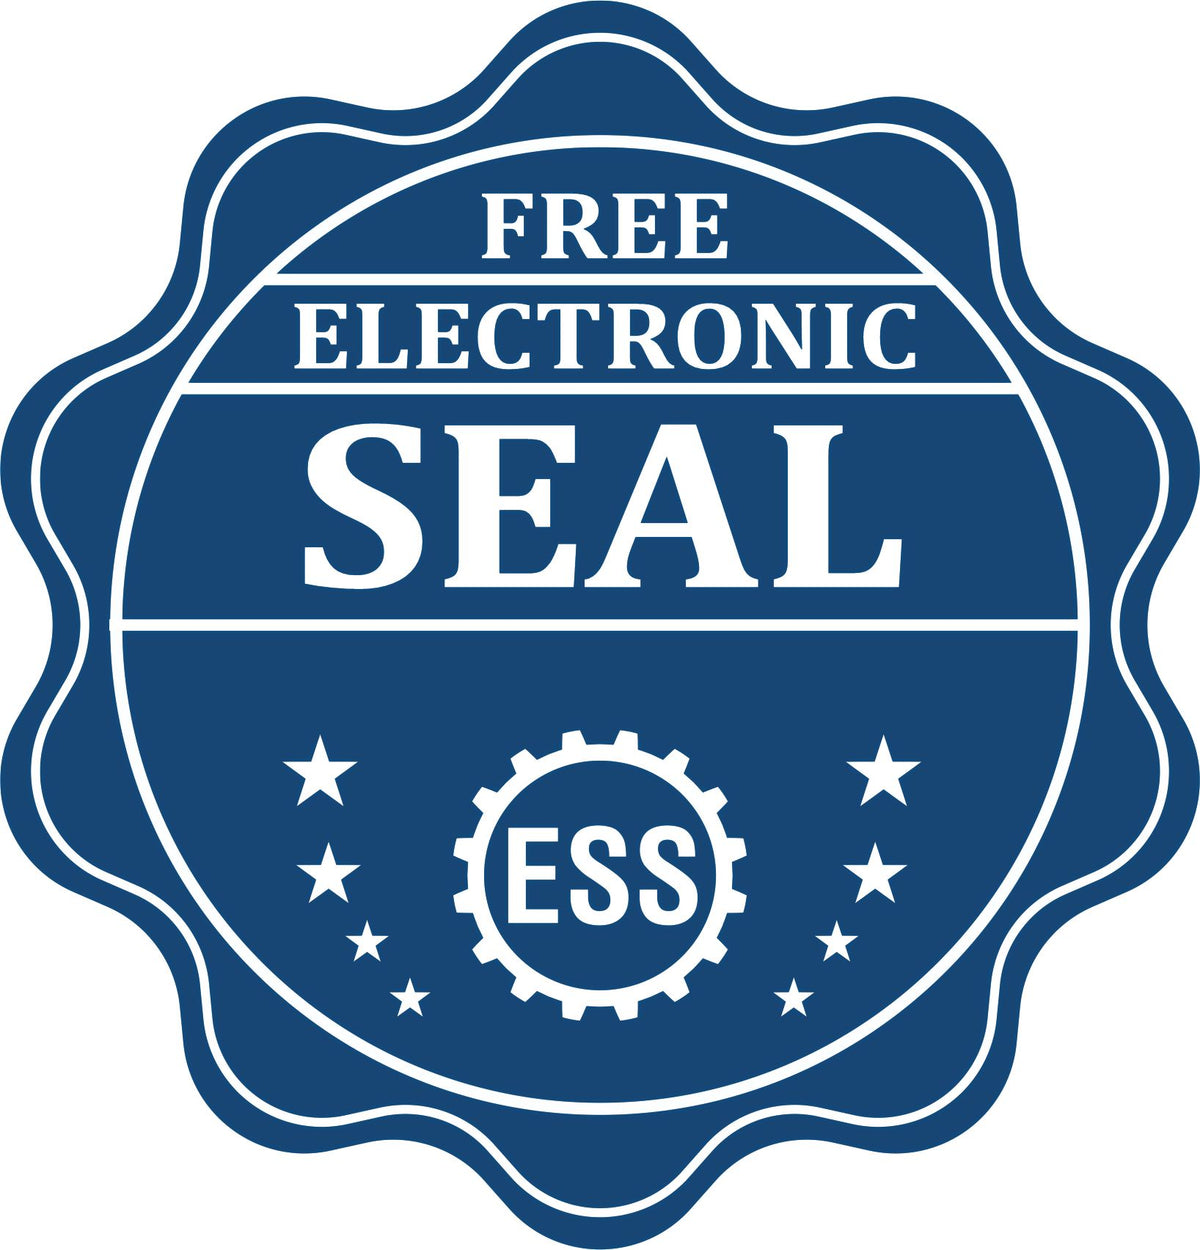 A badge showing a free electronic seal for the Long Reach South Carolina Geology Seal with stars and the ESS gear on the emblem.